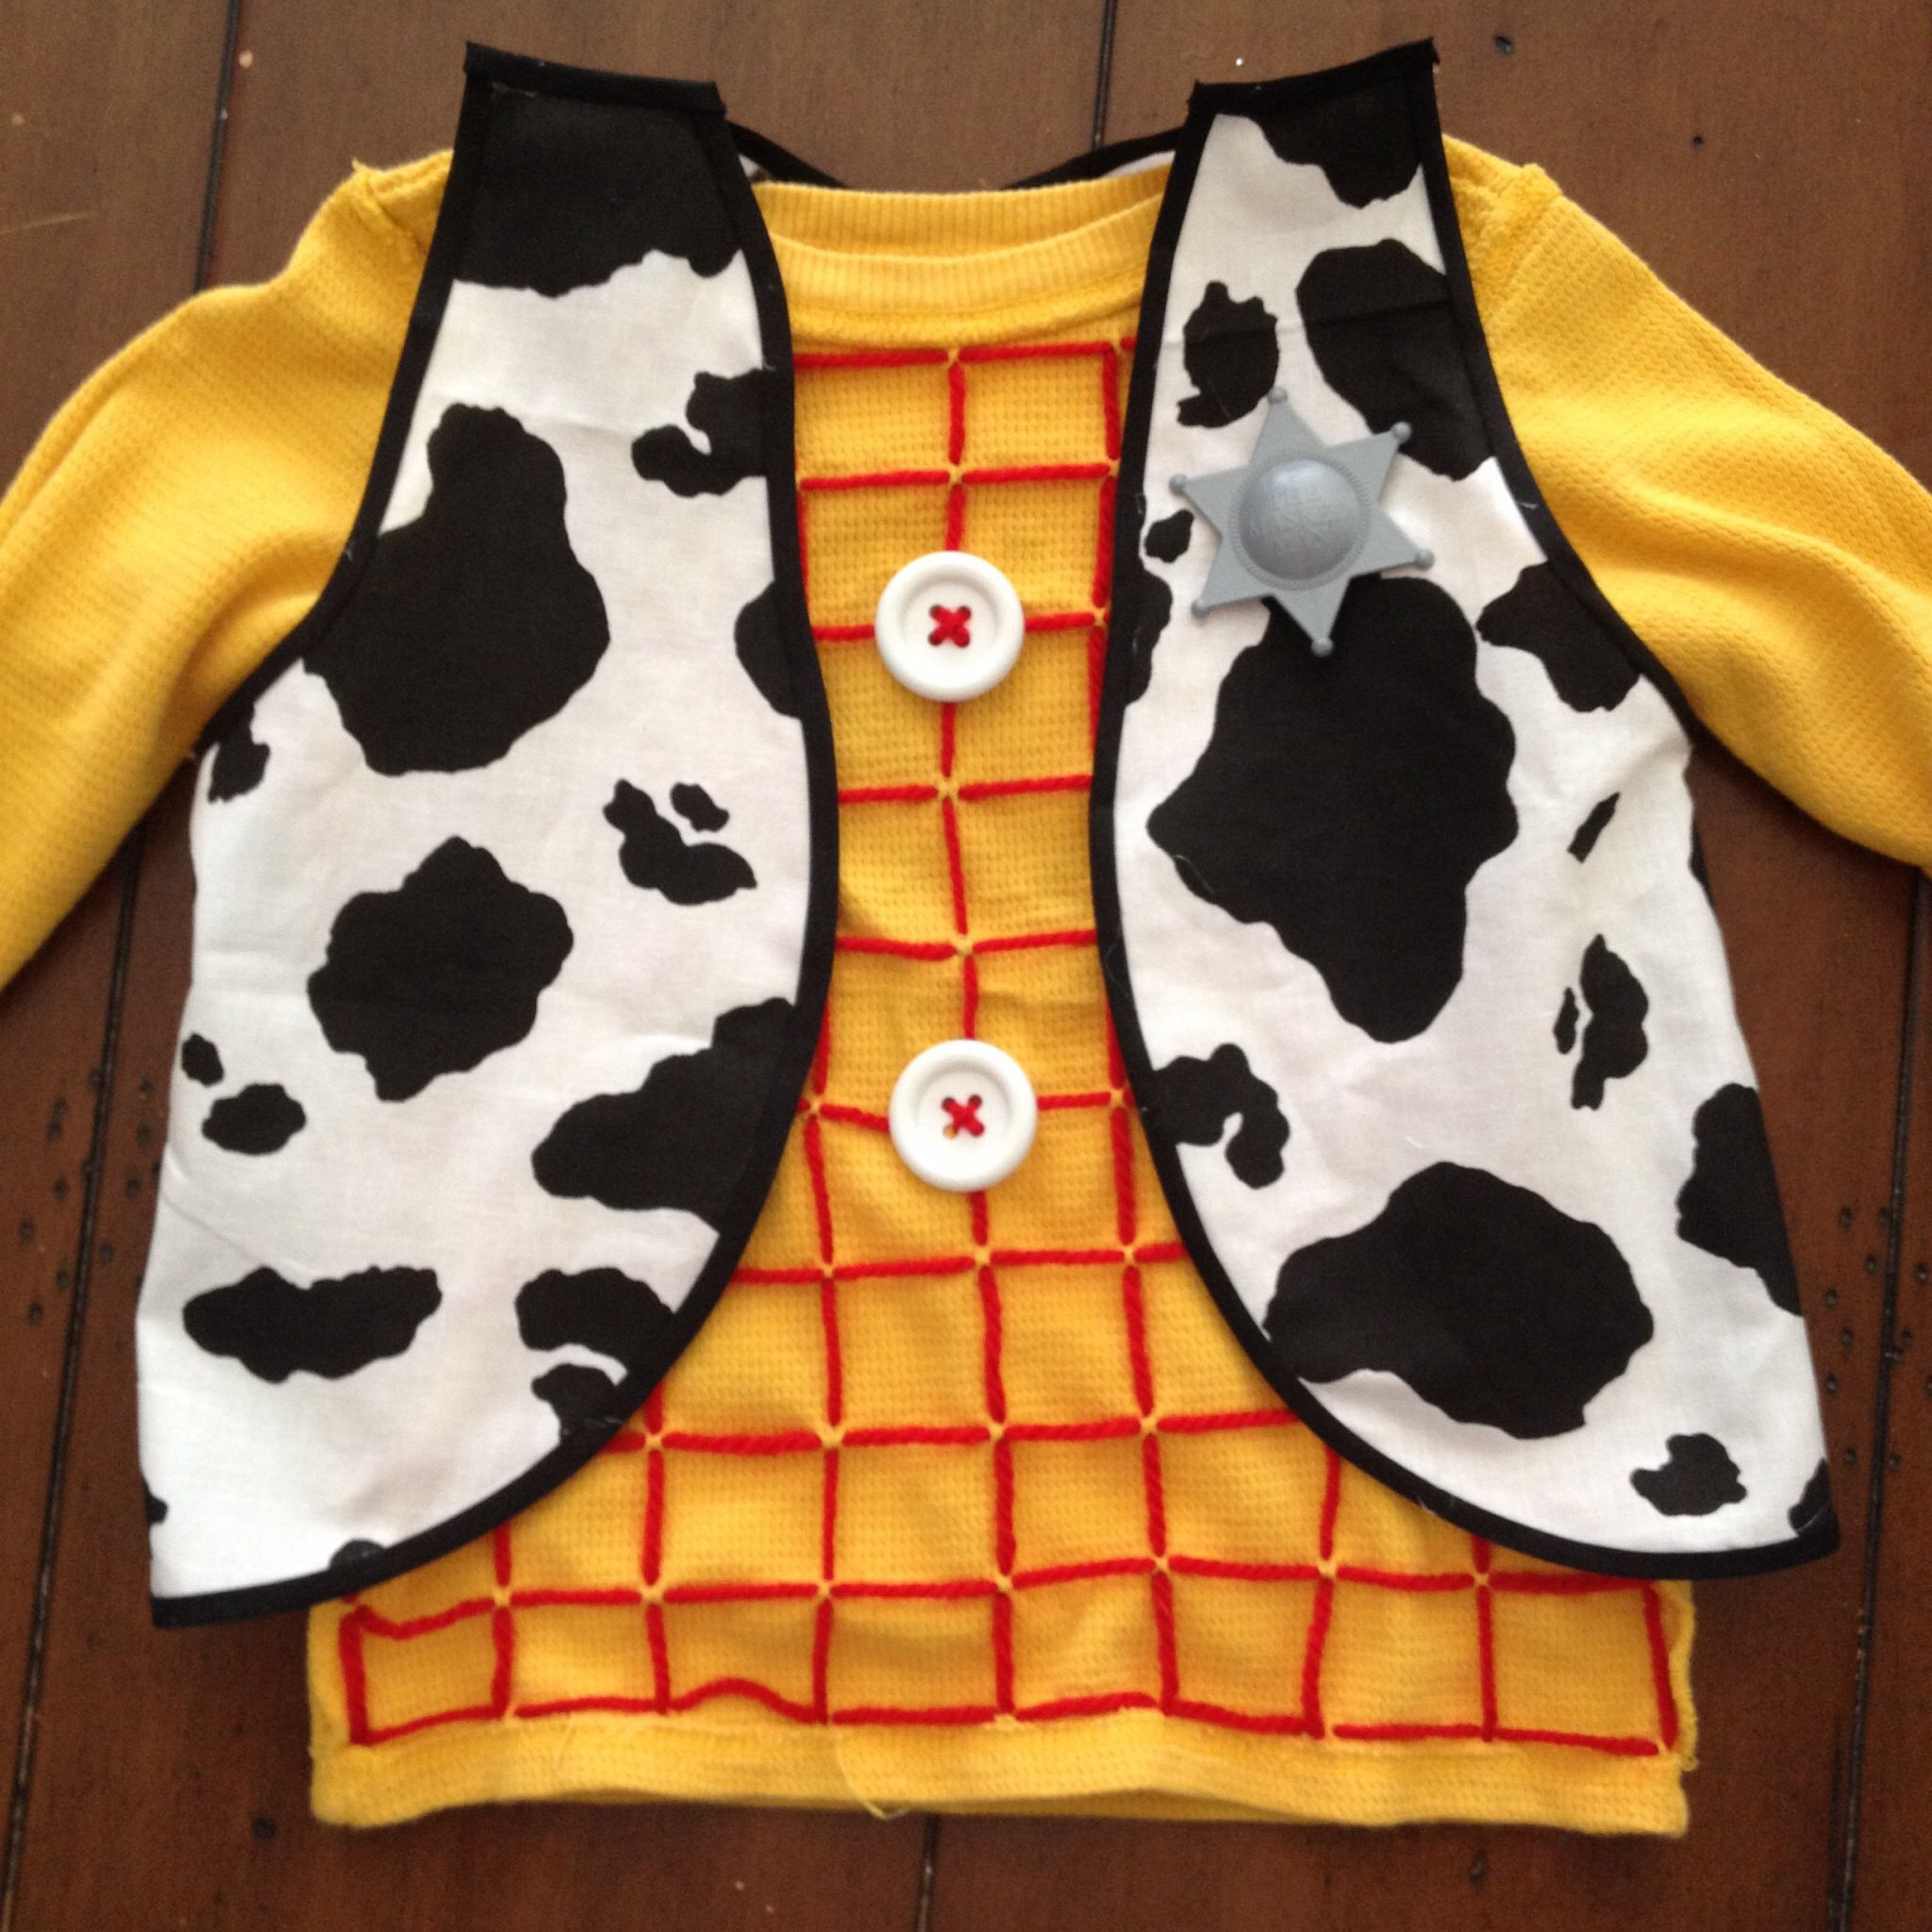 DIY Woody Vest
 DIY Woody shirt and vest Fabric hot glue and edging